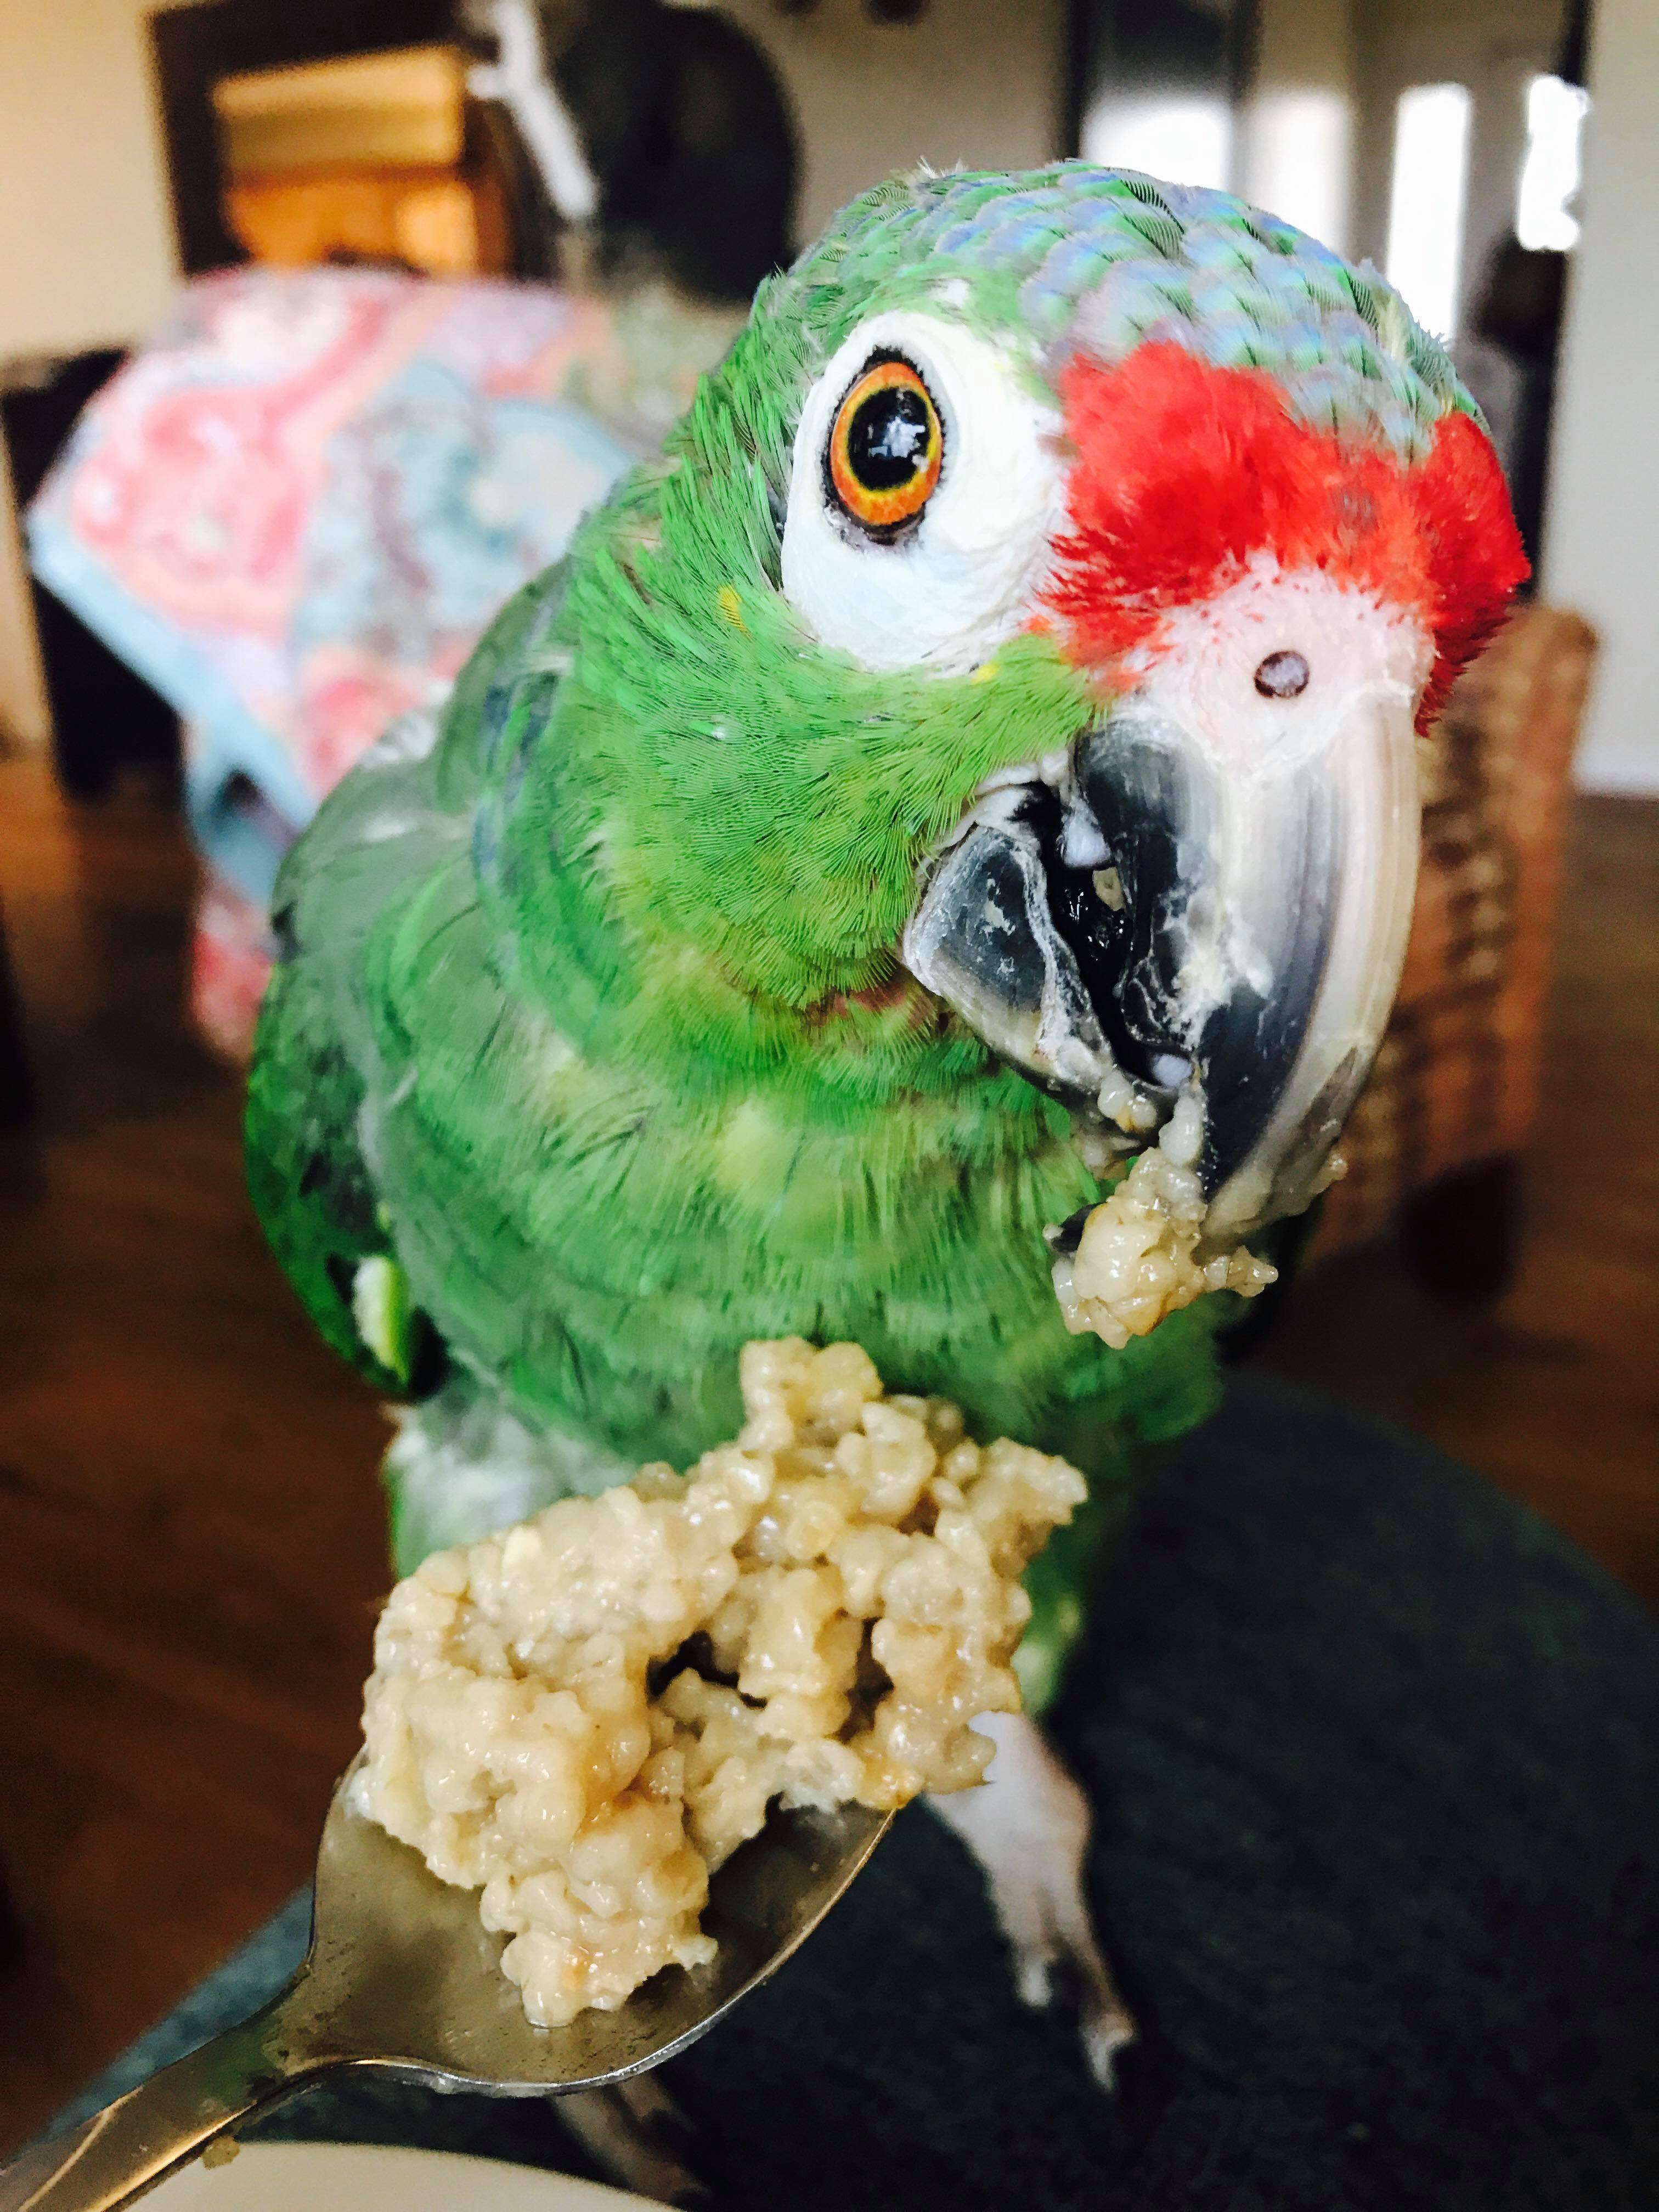 Senior rescue parrot in Kansas eating from a spoon